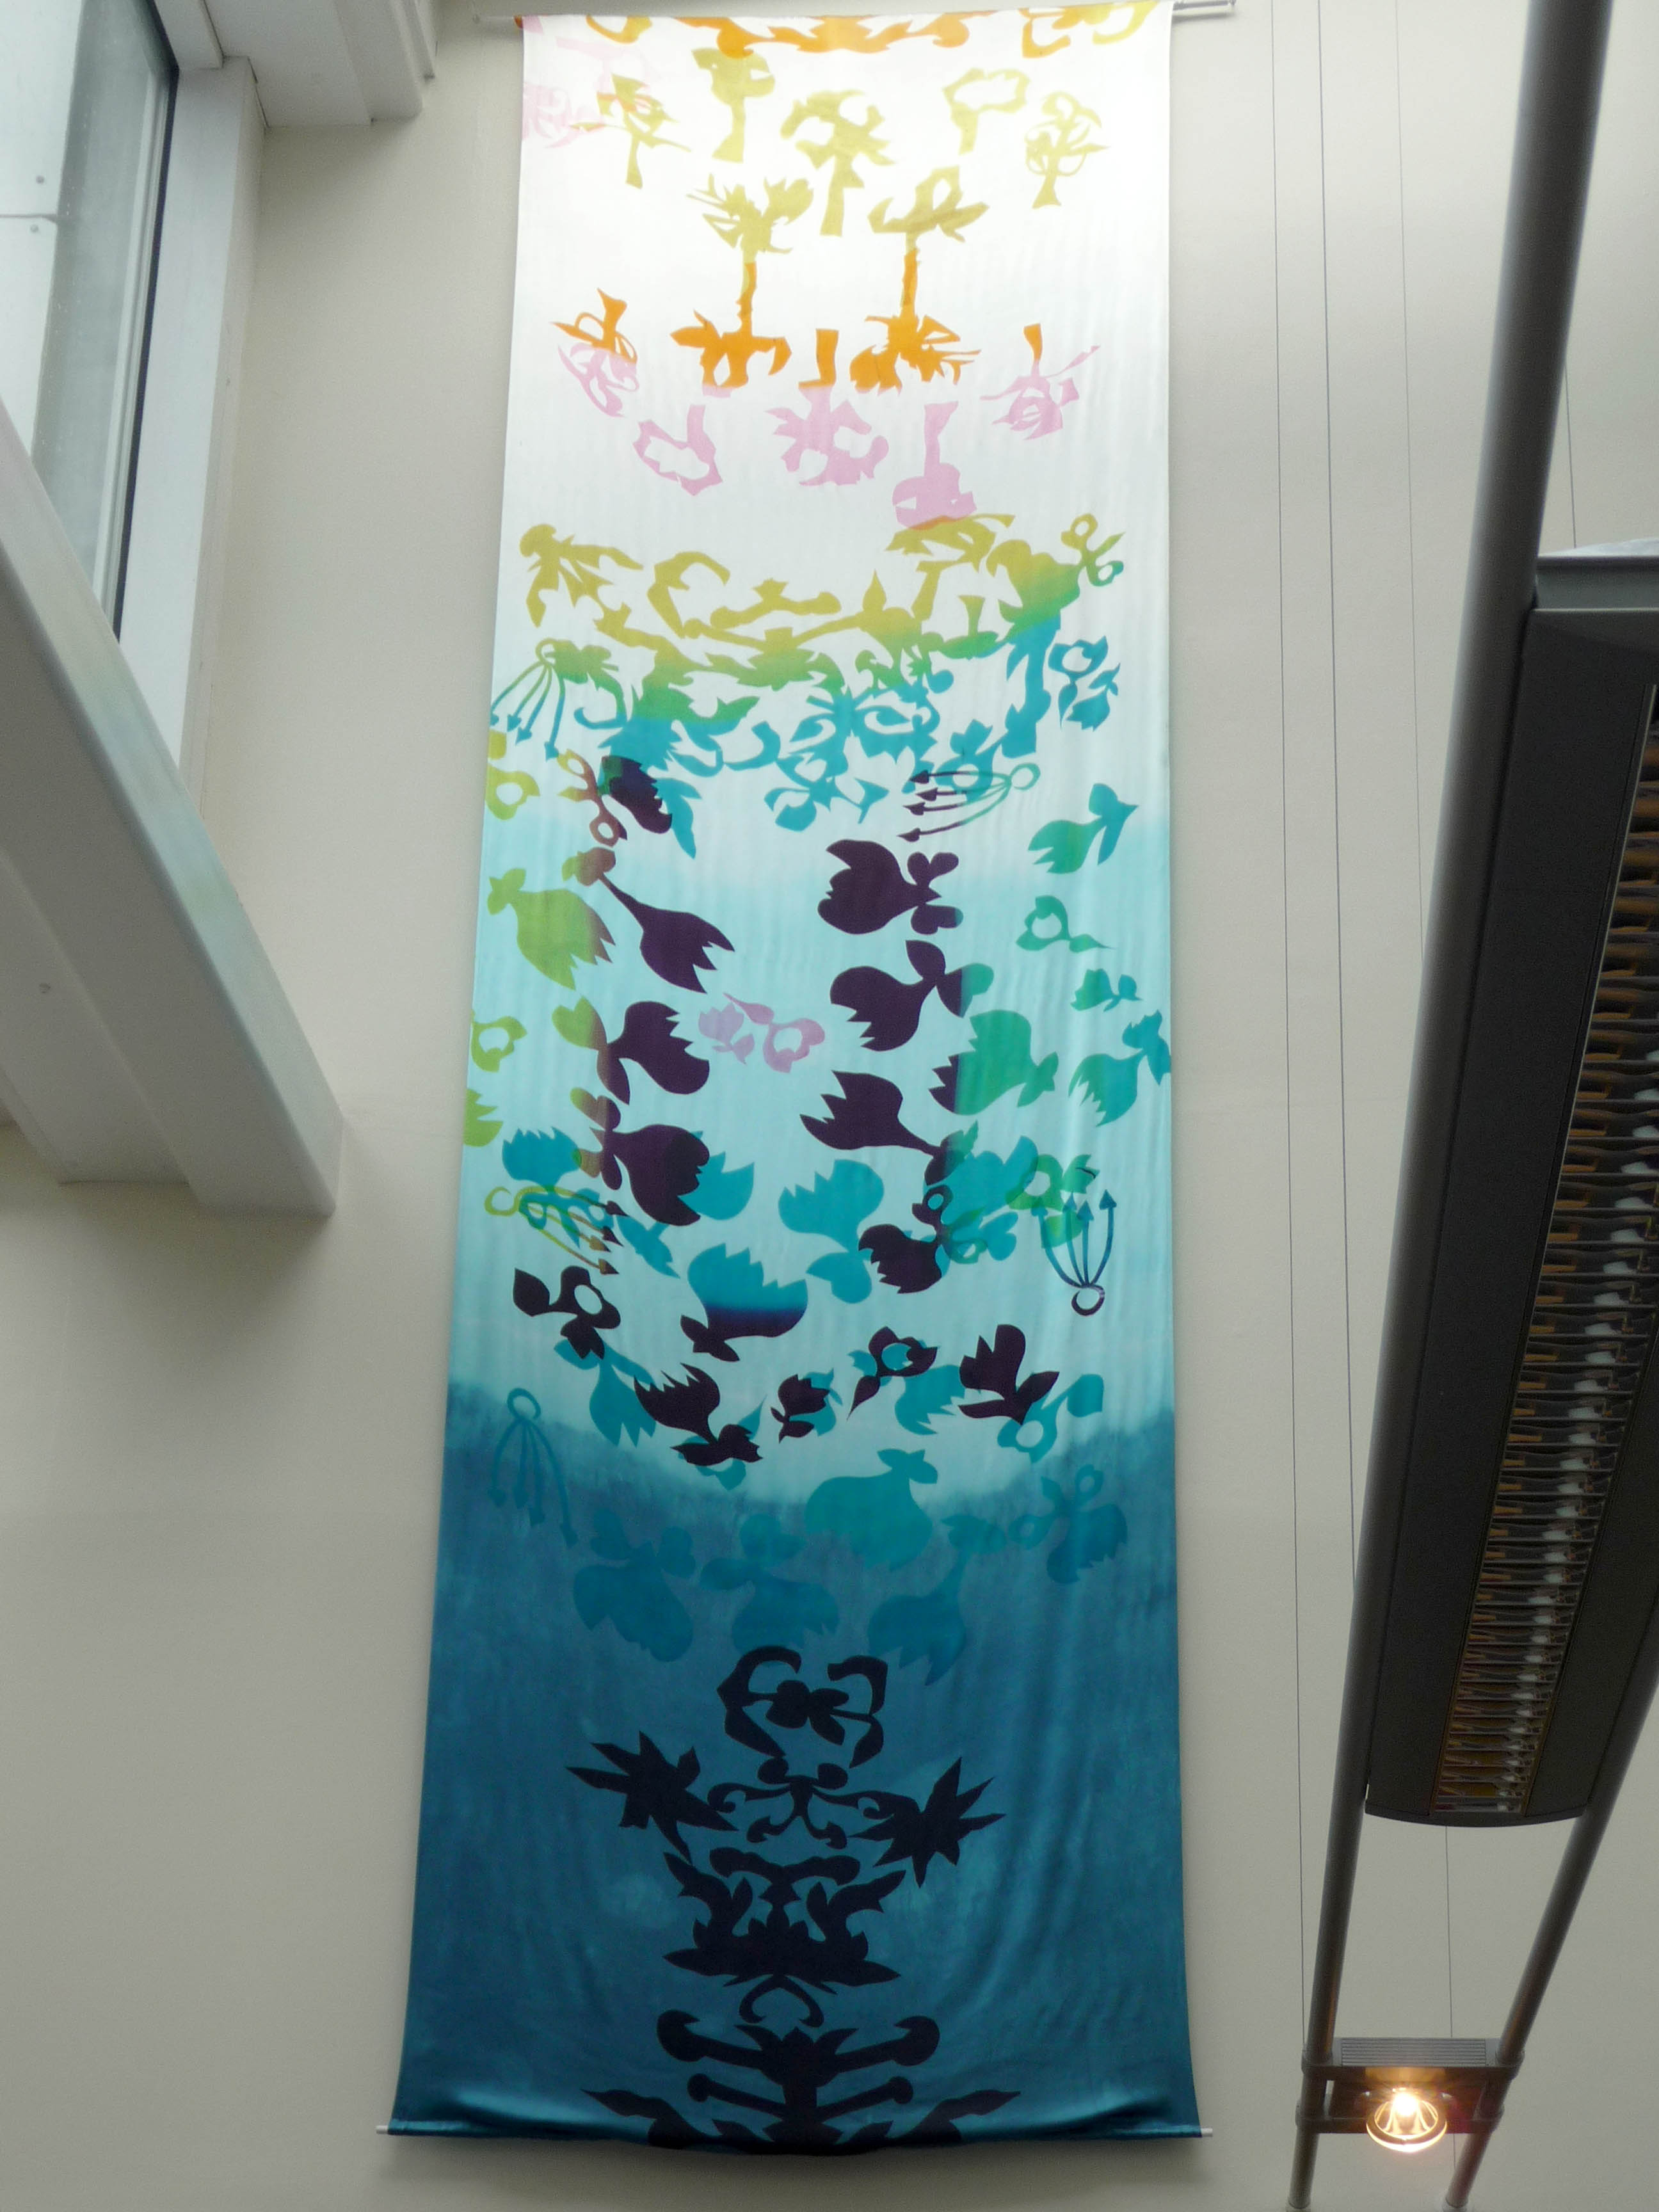 screen printed textile in Liverpool Women's Hospital